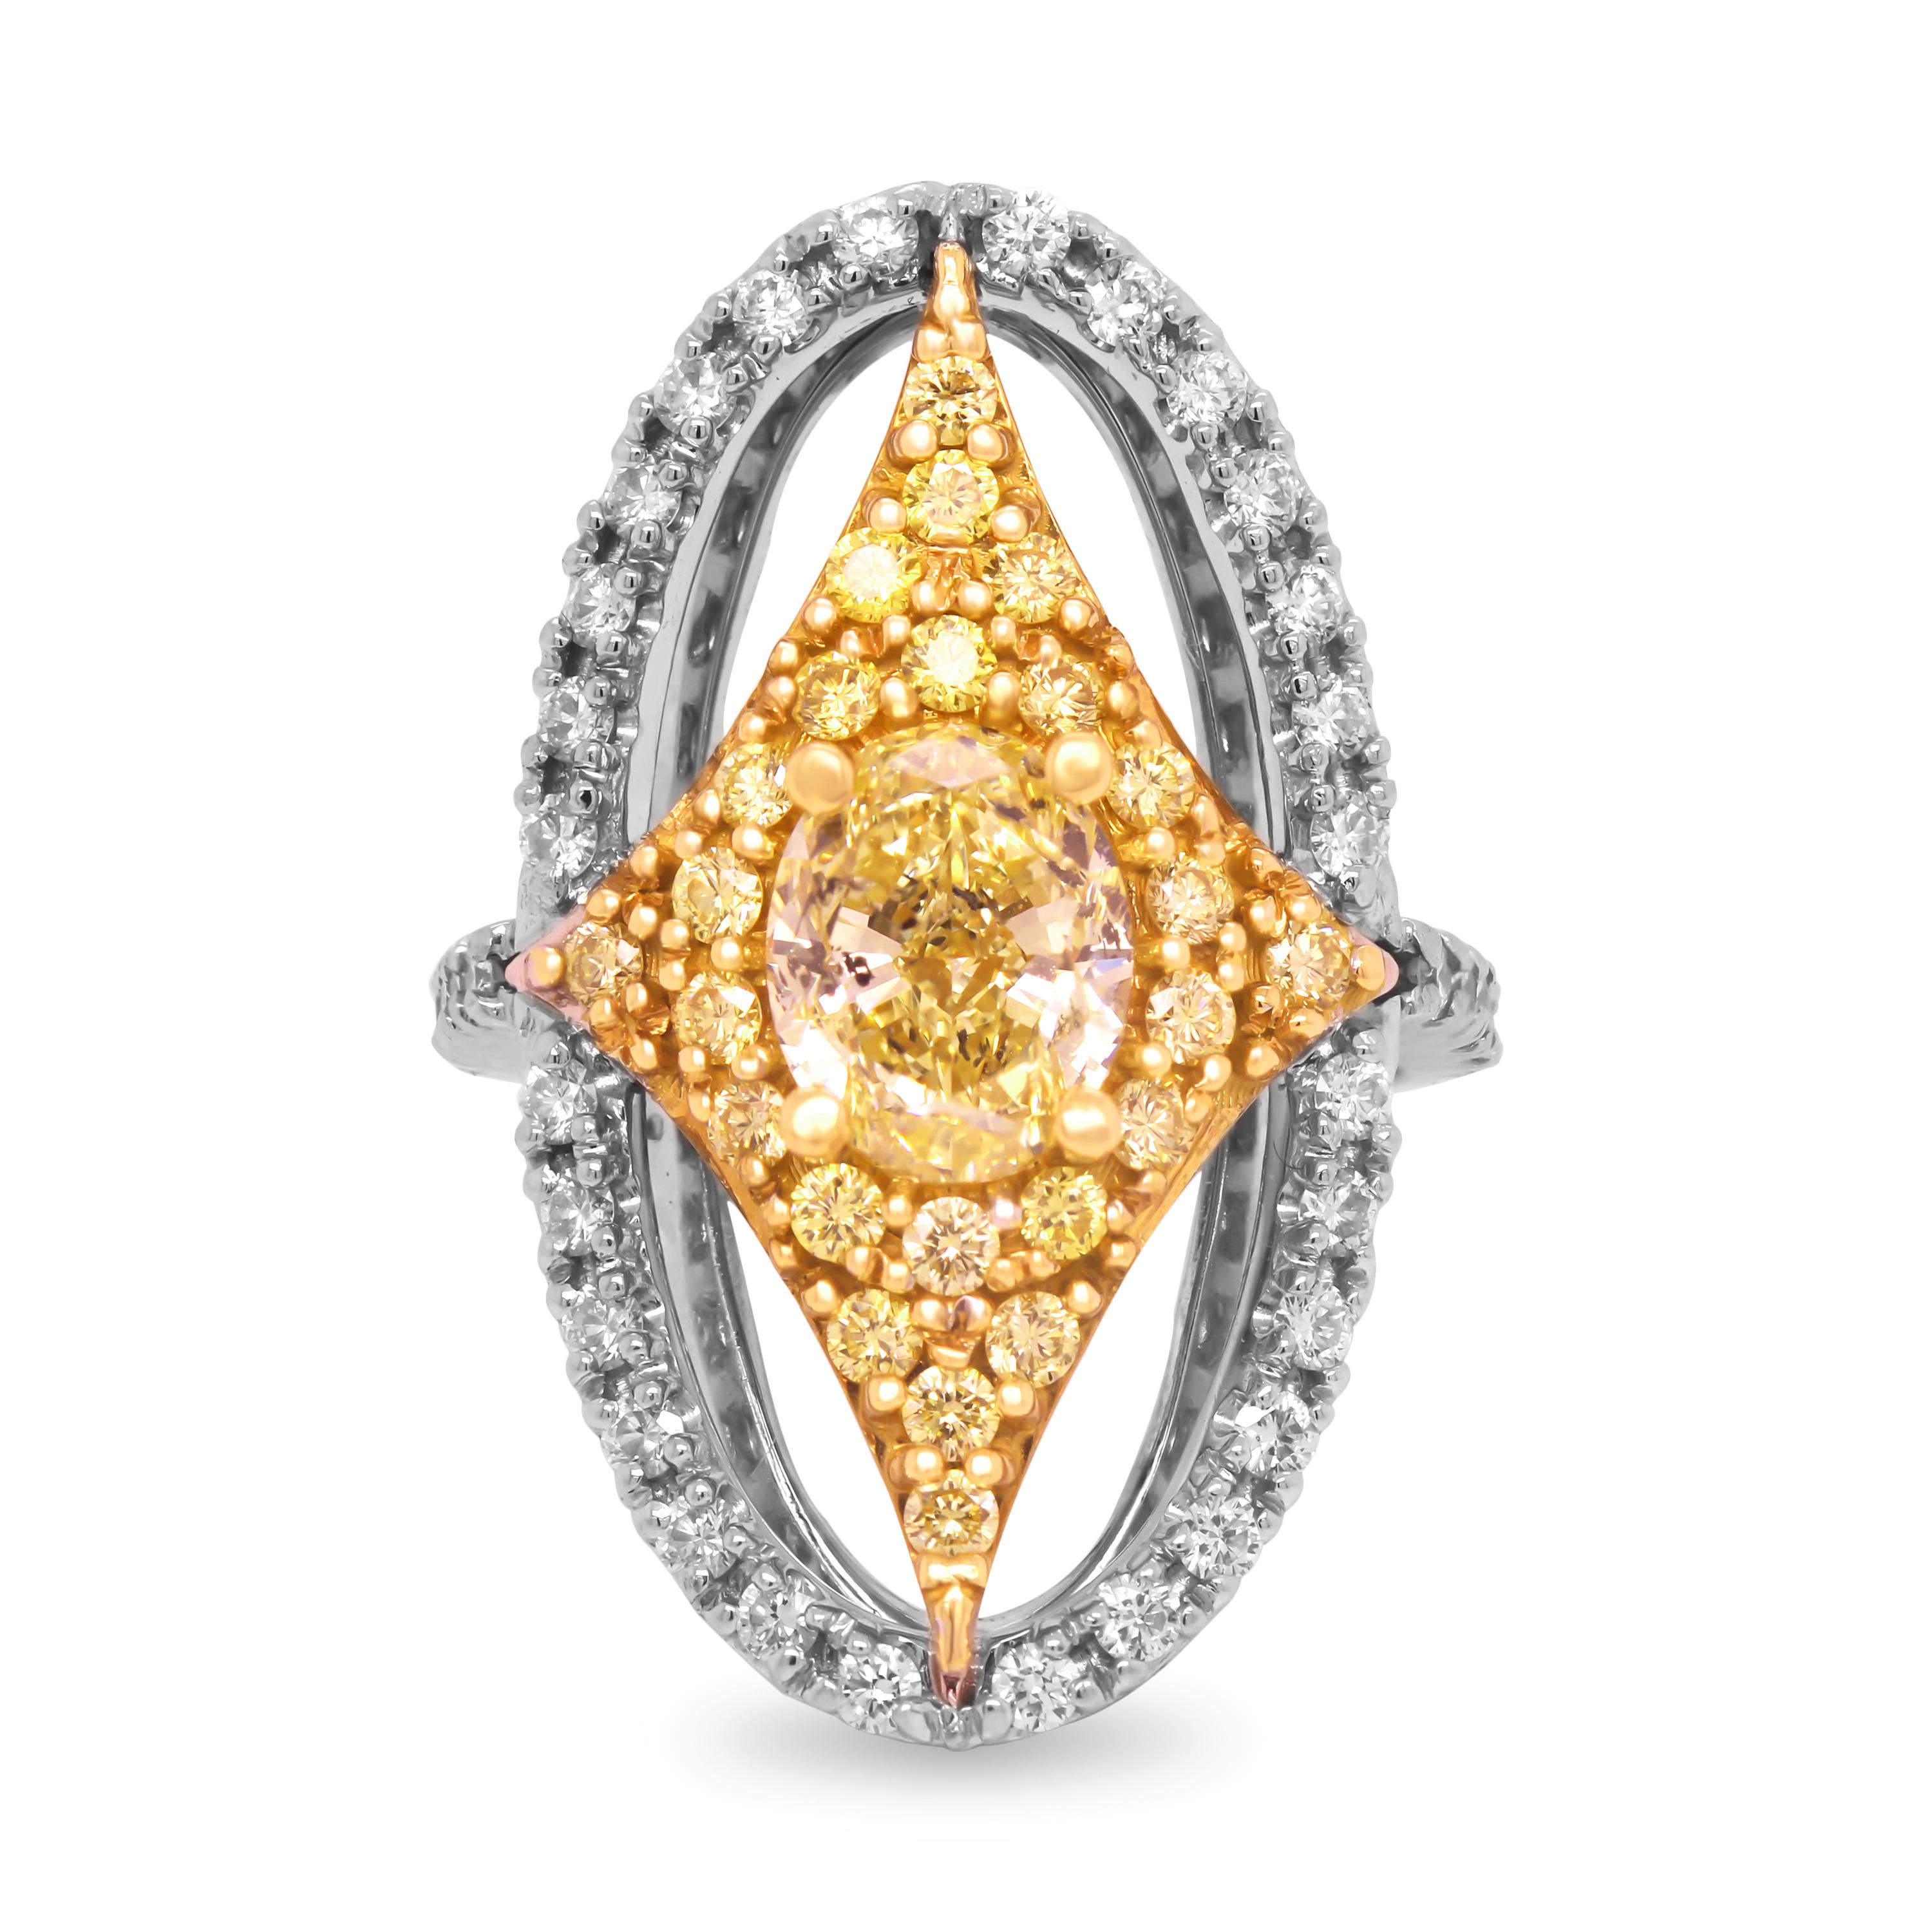 GIA 2.01 Carat Fancy Yellow Diamond Oval Ring with Yellow Diamonds Set in Platinum and 18K Yellow Gold

This oval ring features a four cornered design with an oval frame set with yellow diamonds and a Fancy yellow diamond center. This ring is a